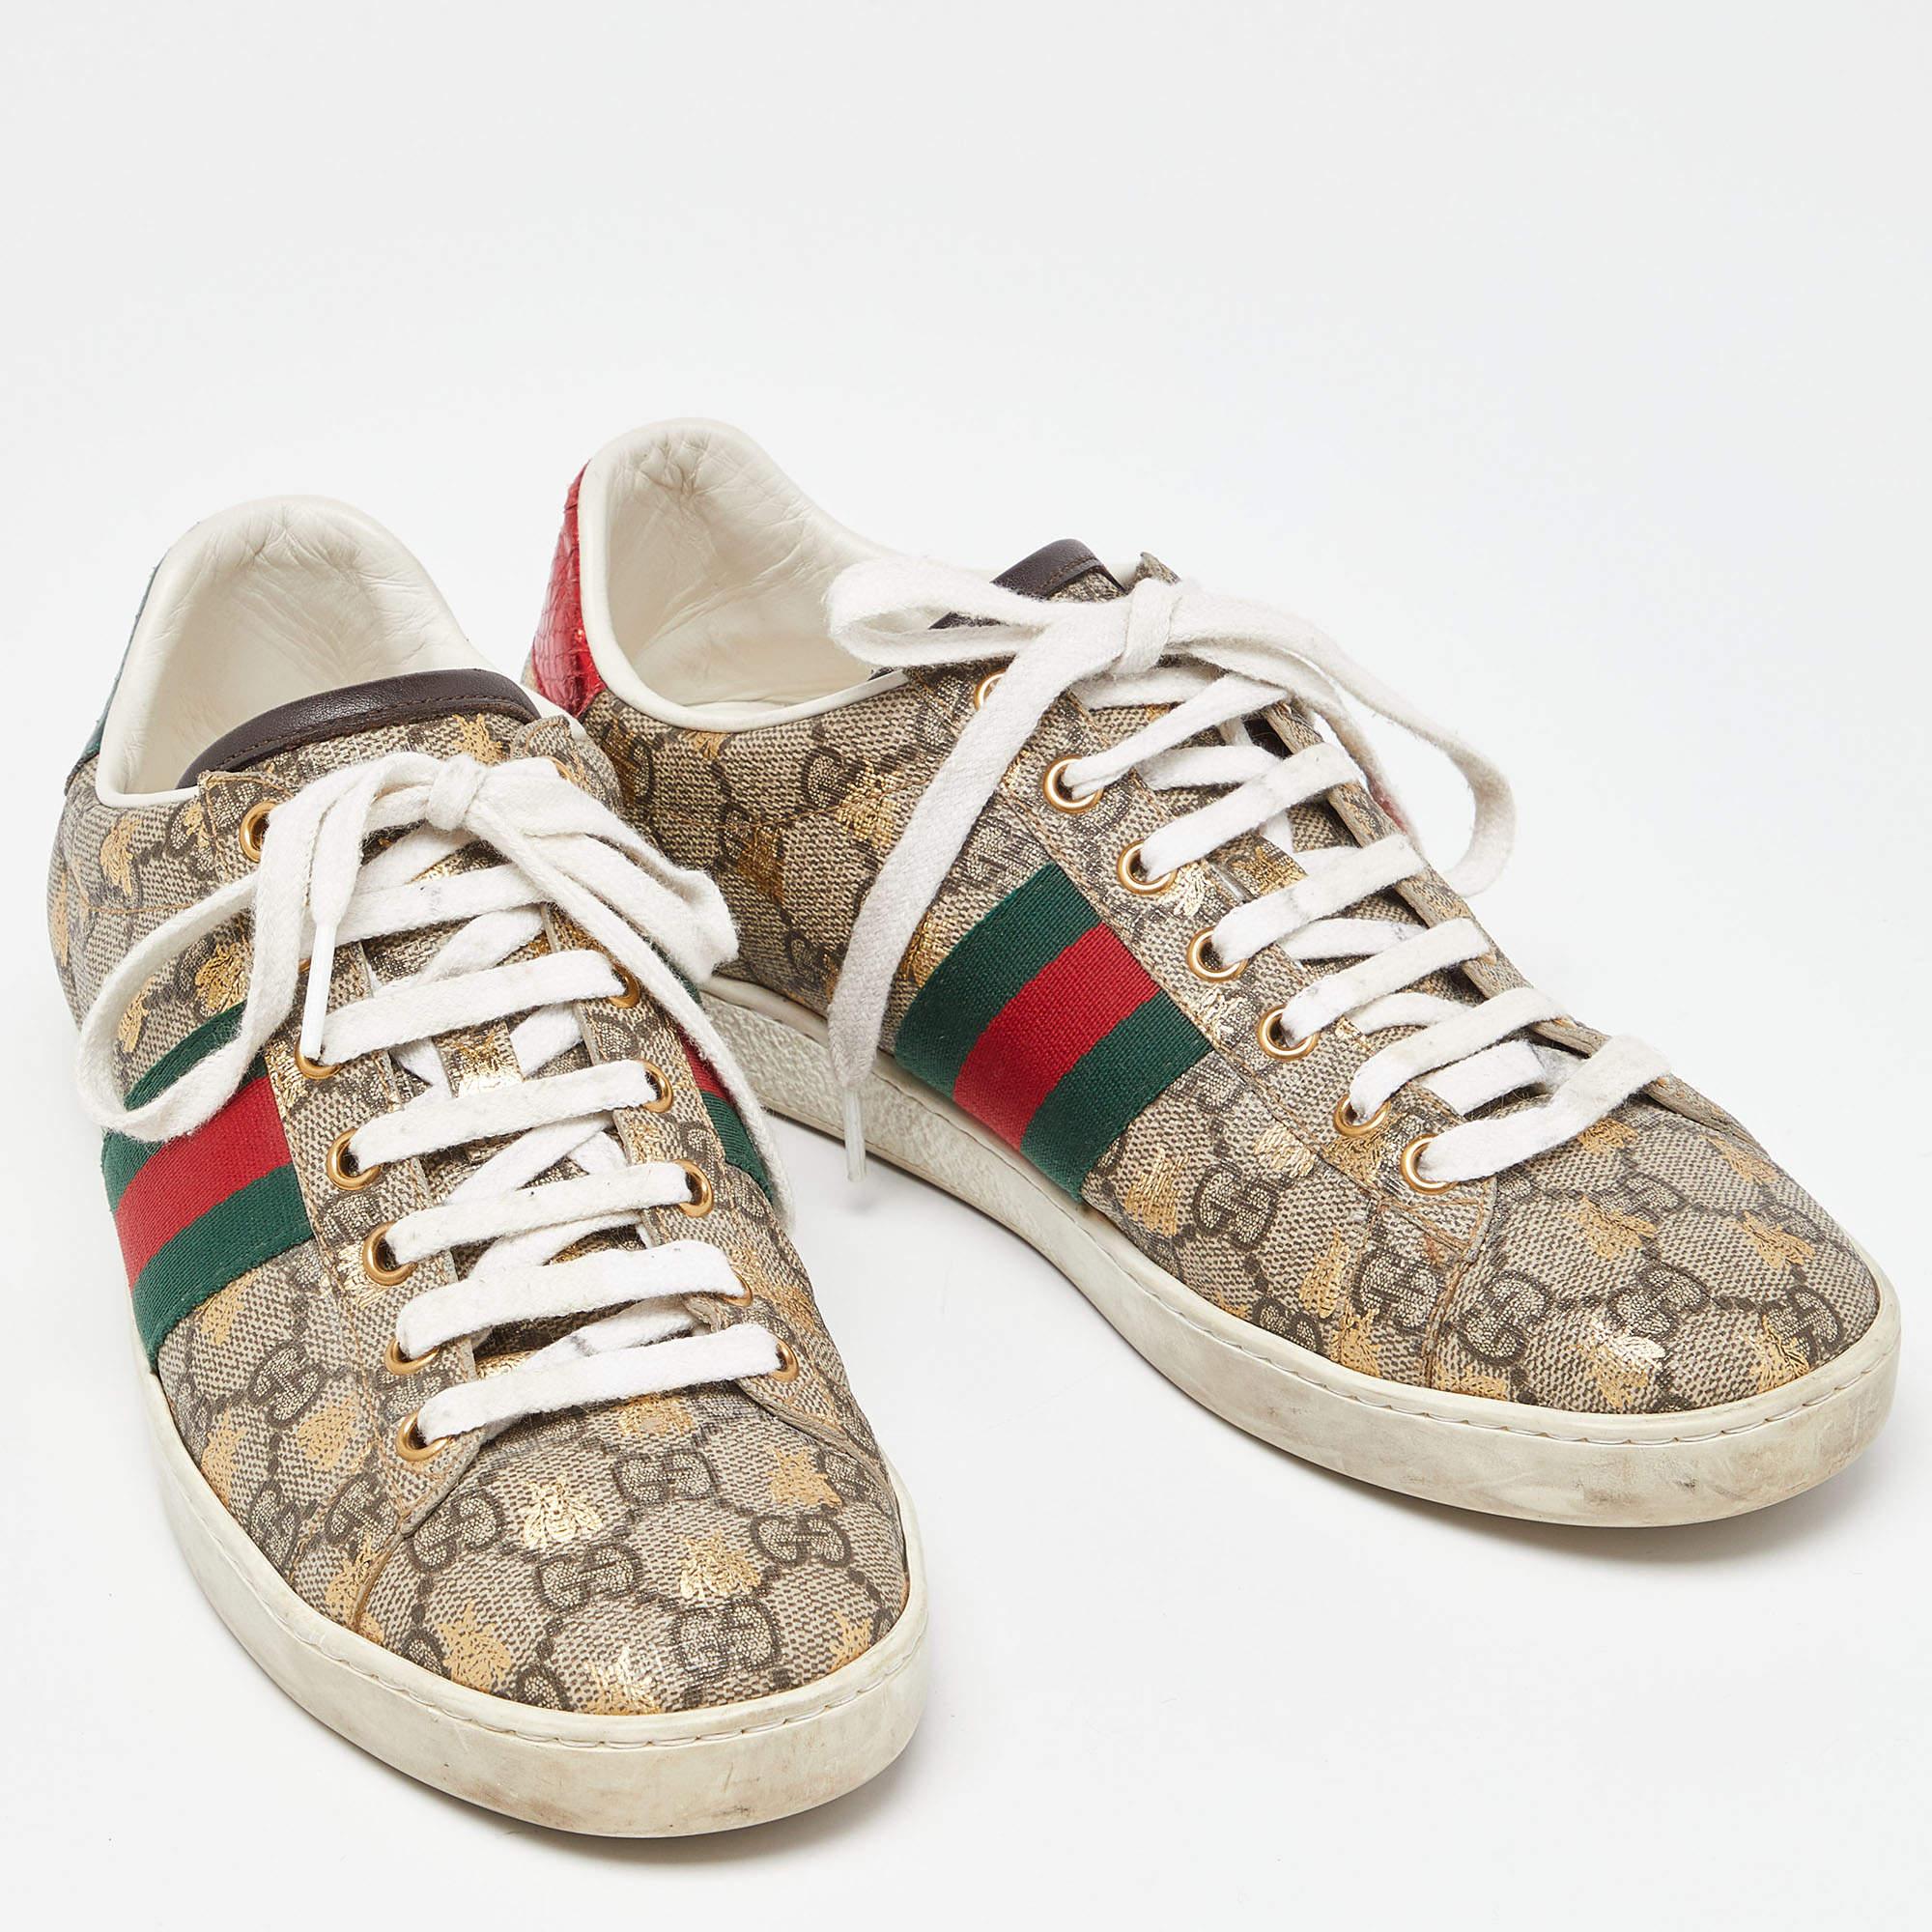 Stylish, comfortable, and sturdy, these Ace sneakers from the House of Gucci will make a great addition to your luxury footwear collection. They are fashioned in beige GG Supreme canvas into a low-top profile. They are adorned with the iconic Web